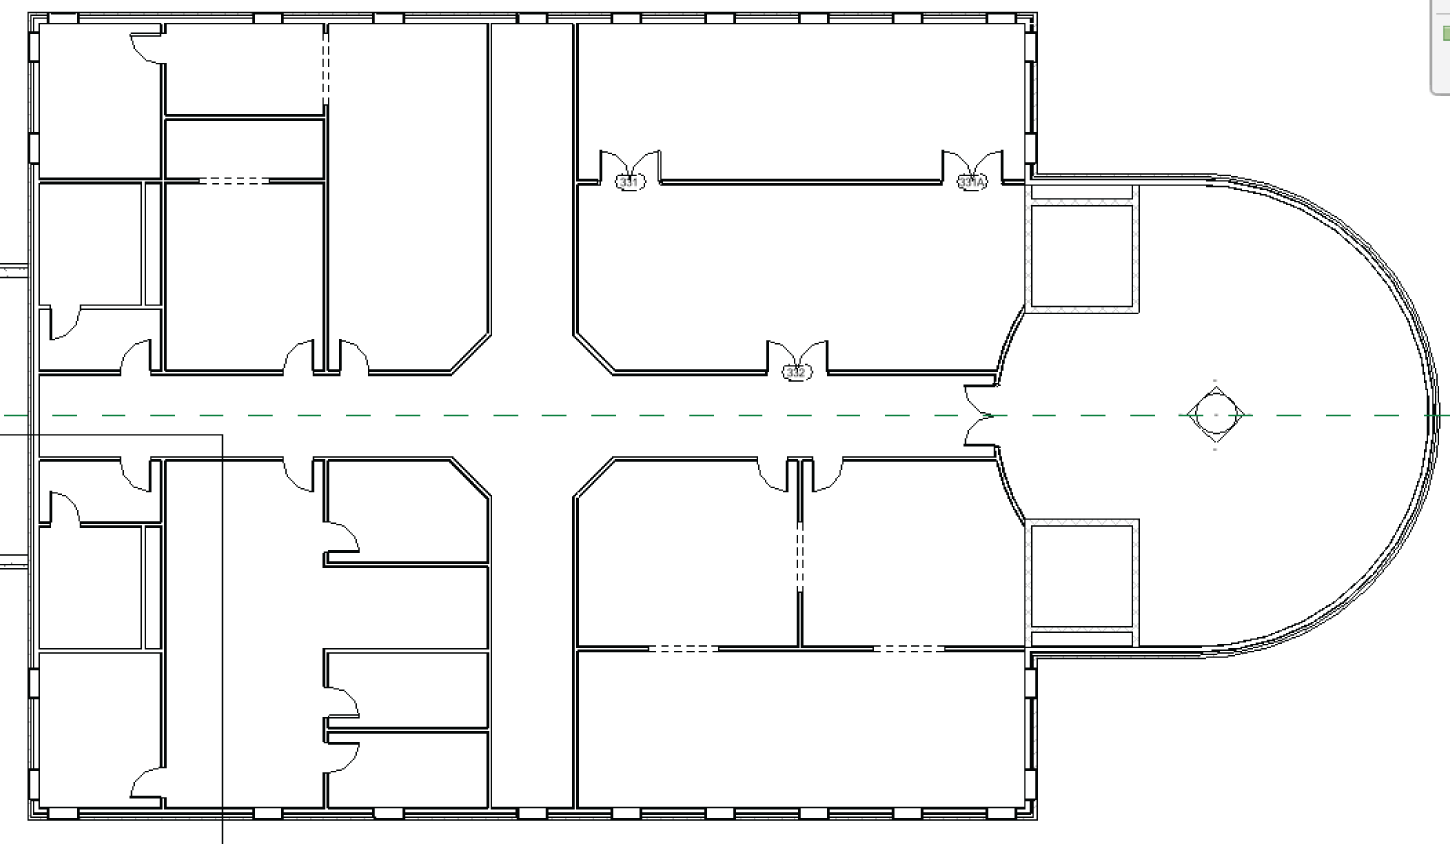 Level 3: This floor plan was mostly copied from Level 1, with the exception of the east side where the walls conflicted with the windows.